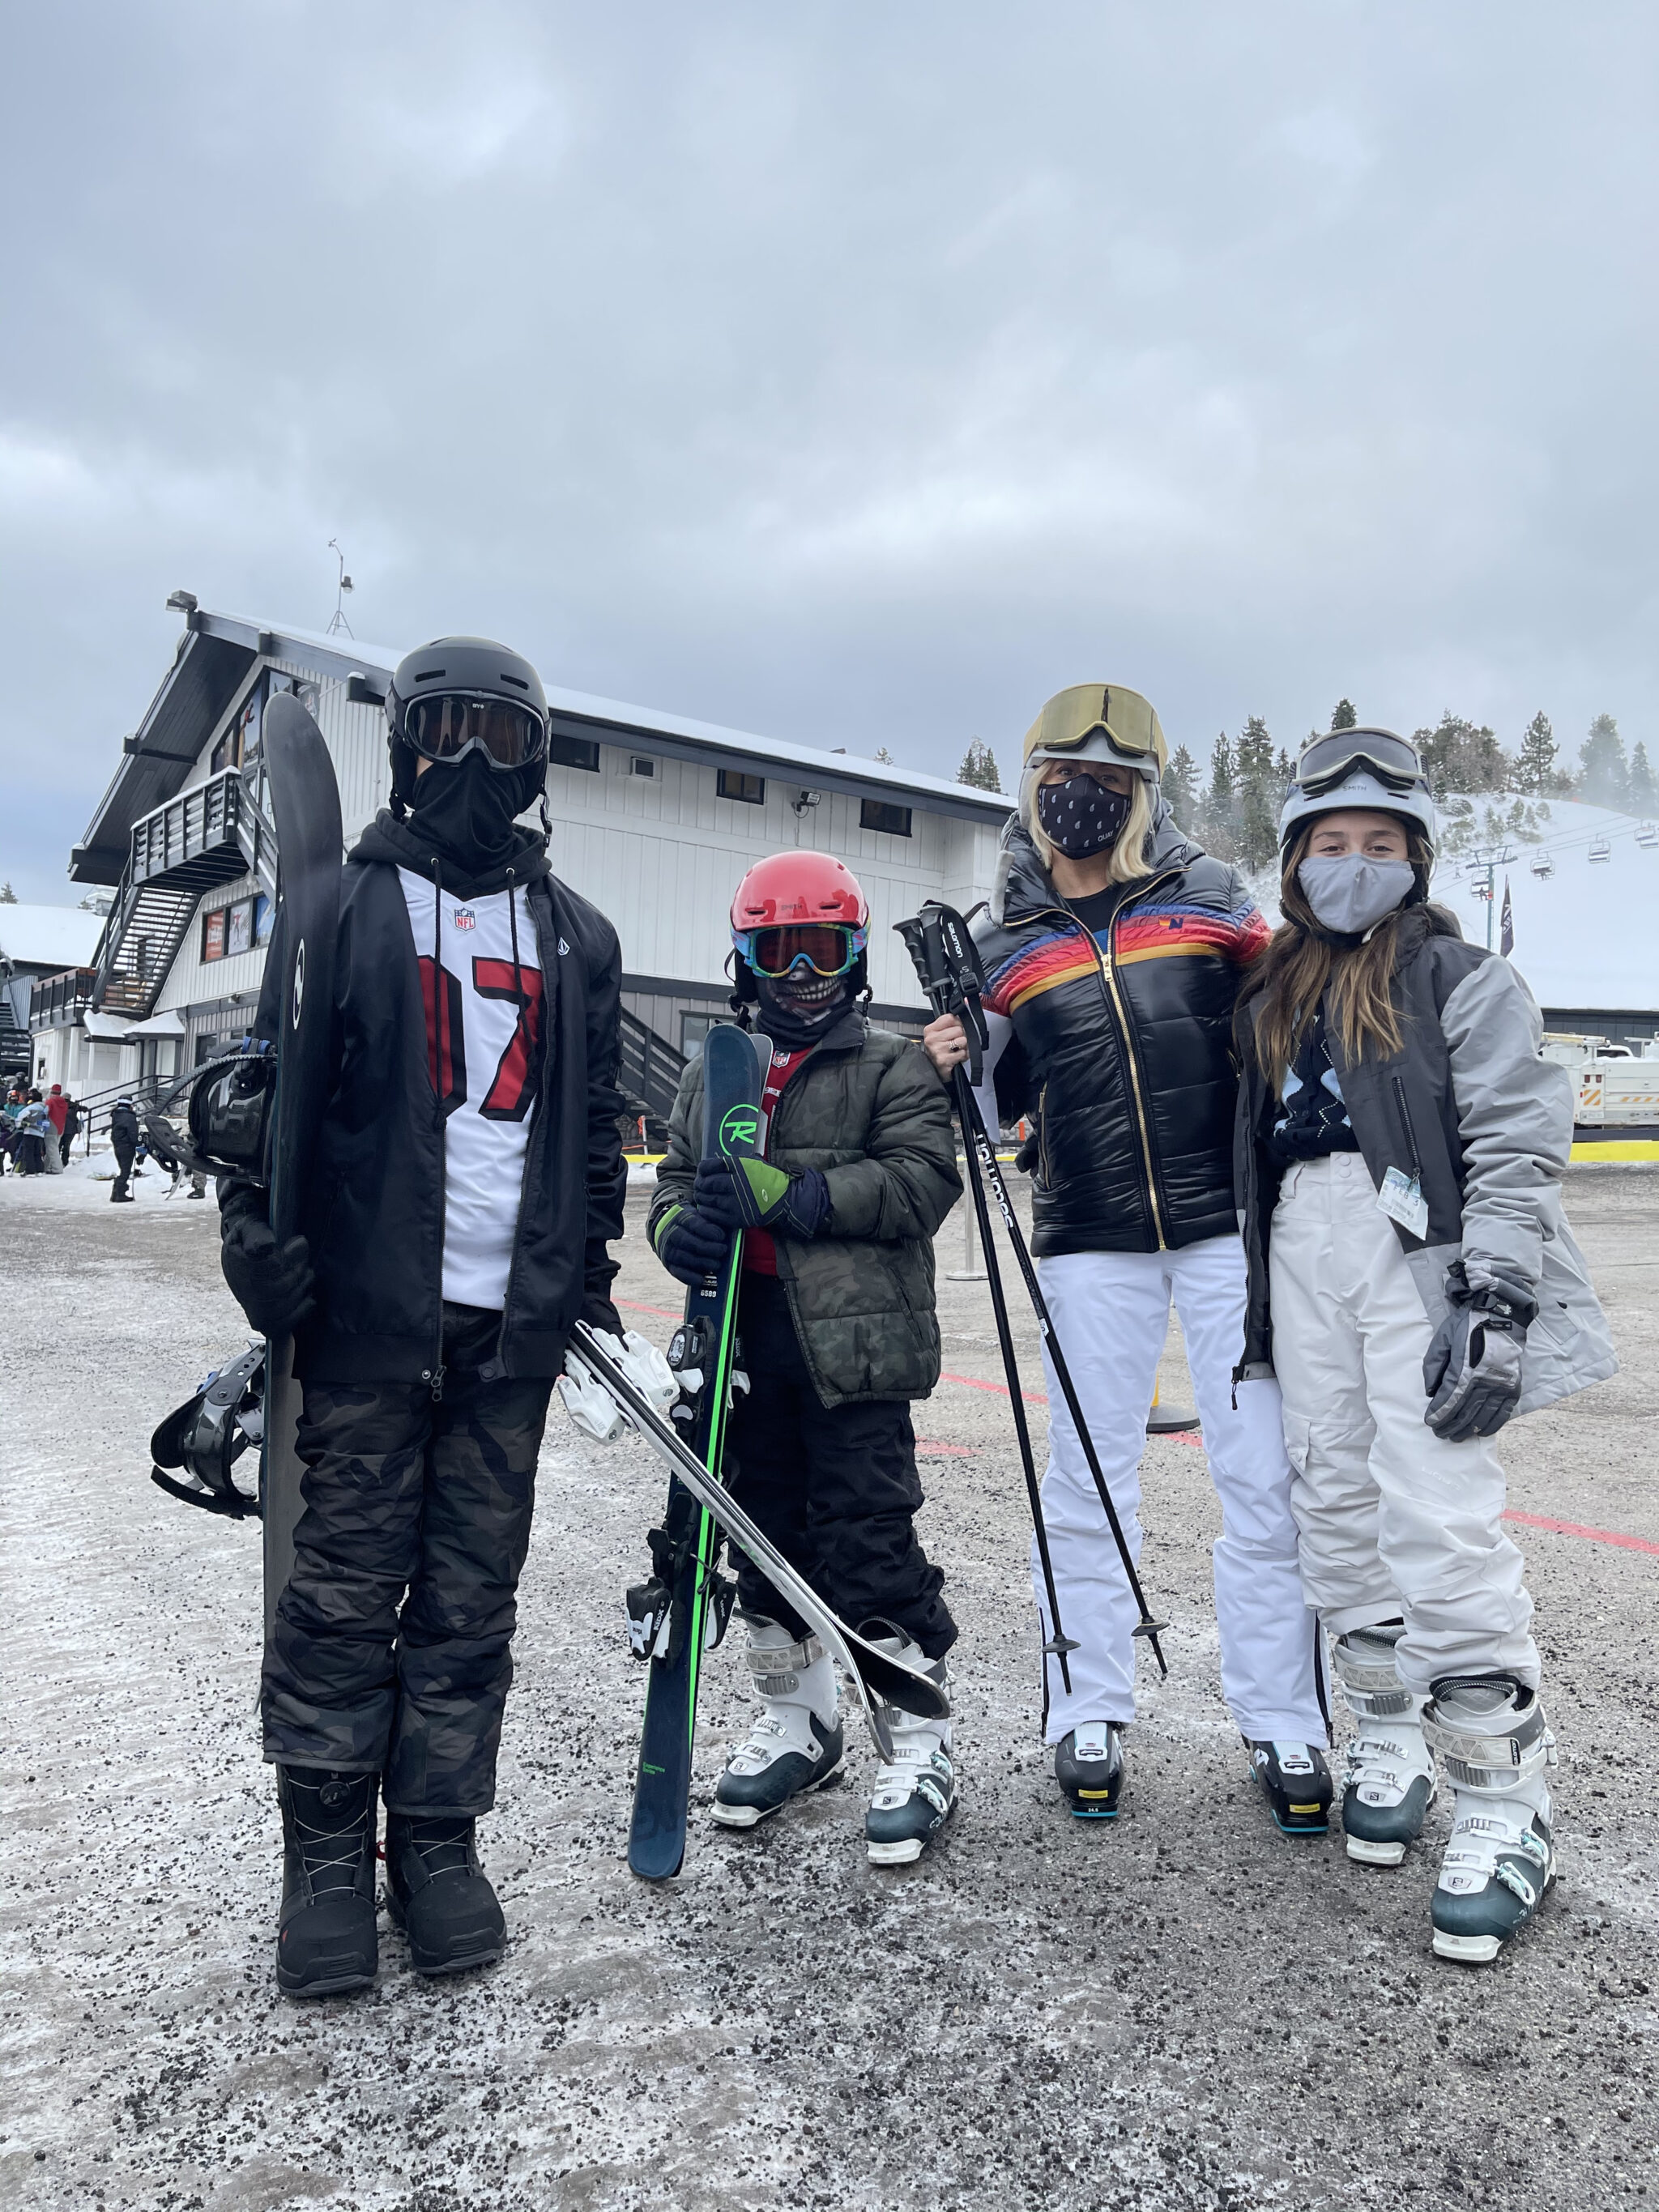 family skiing together